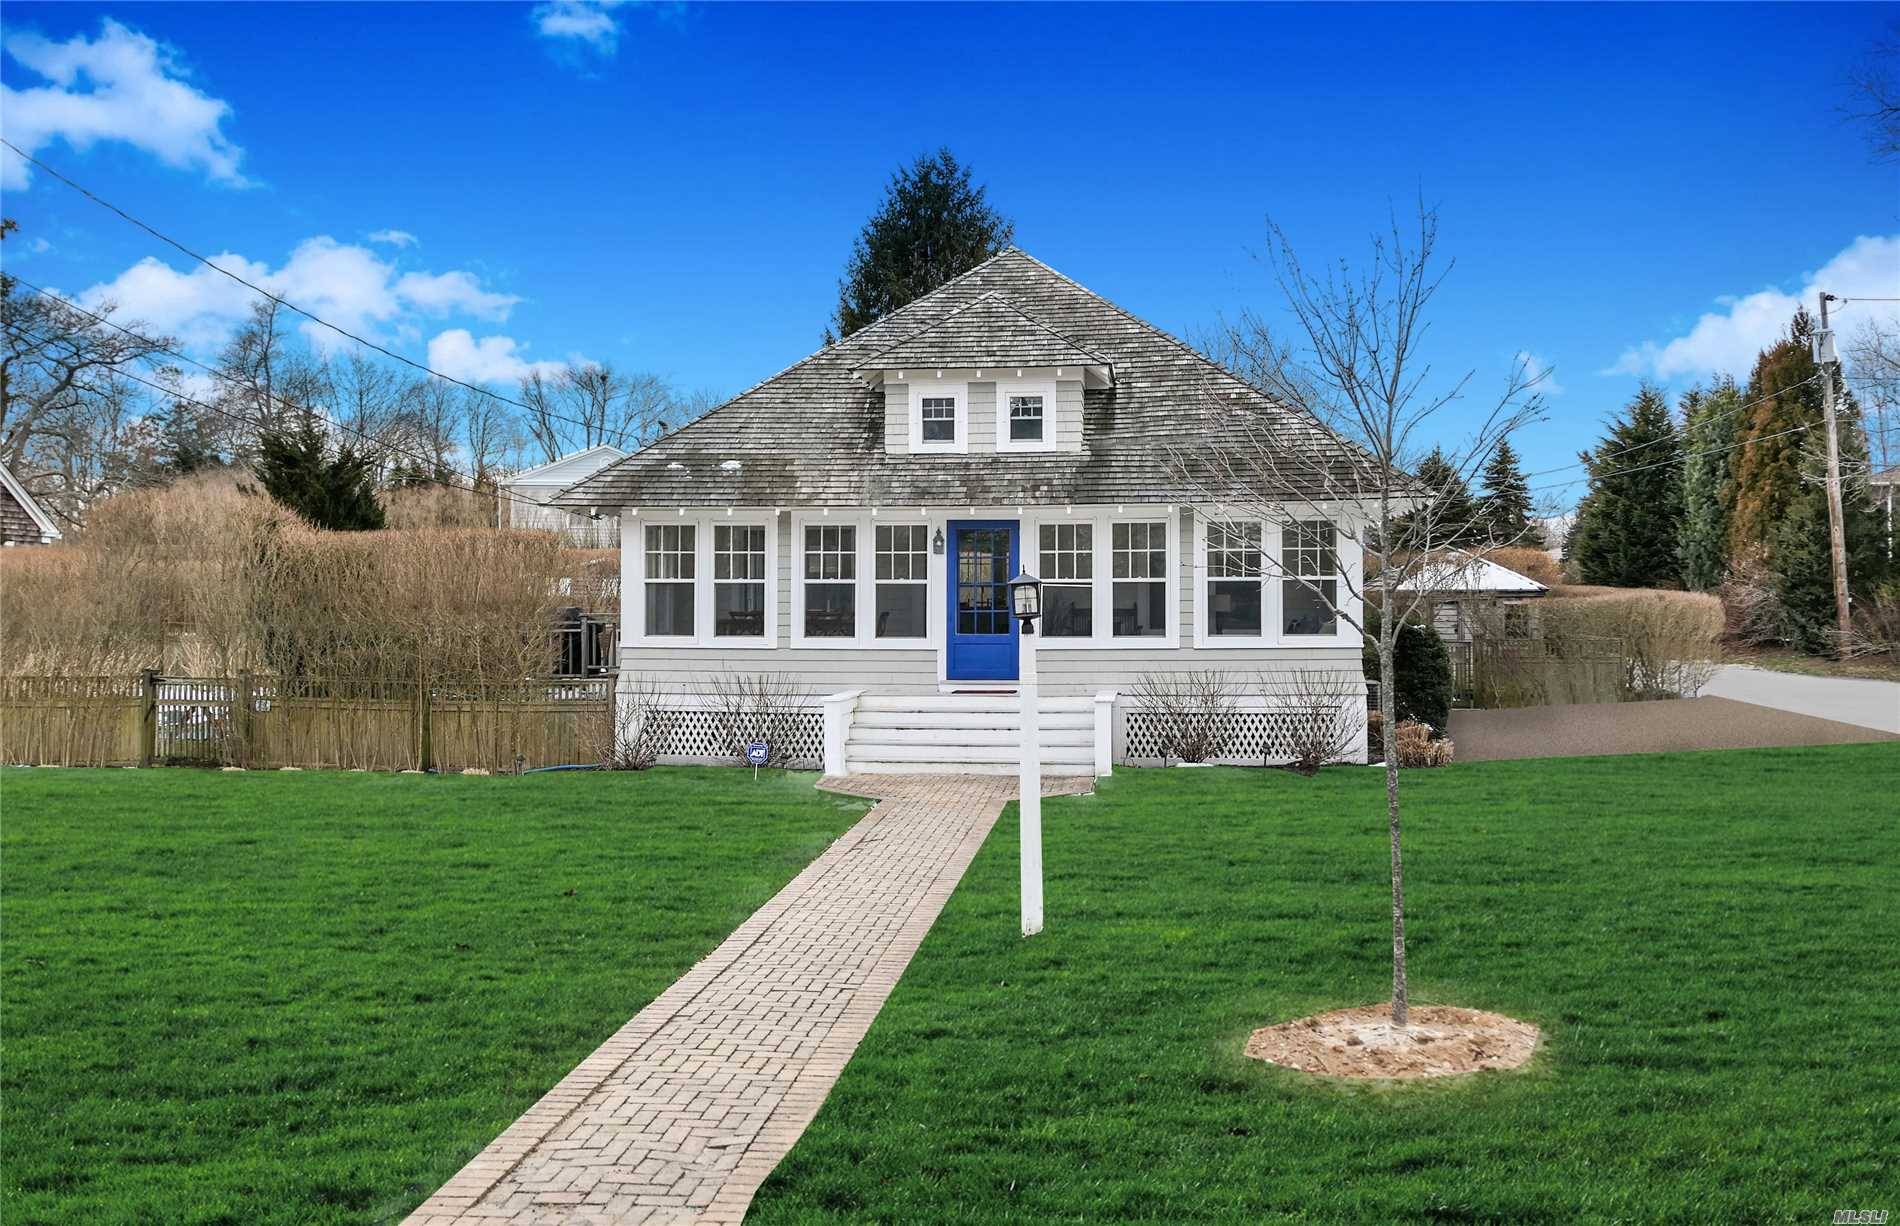 The Perfect Cottage In Bellport Village South!